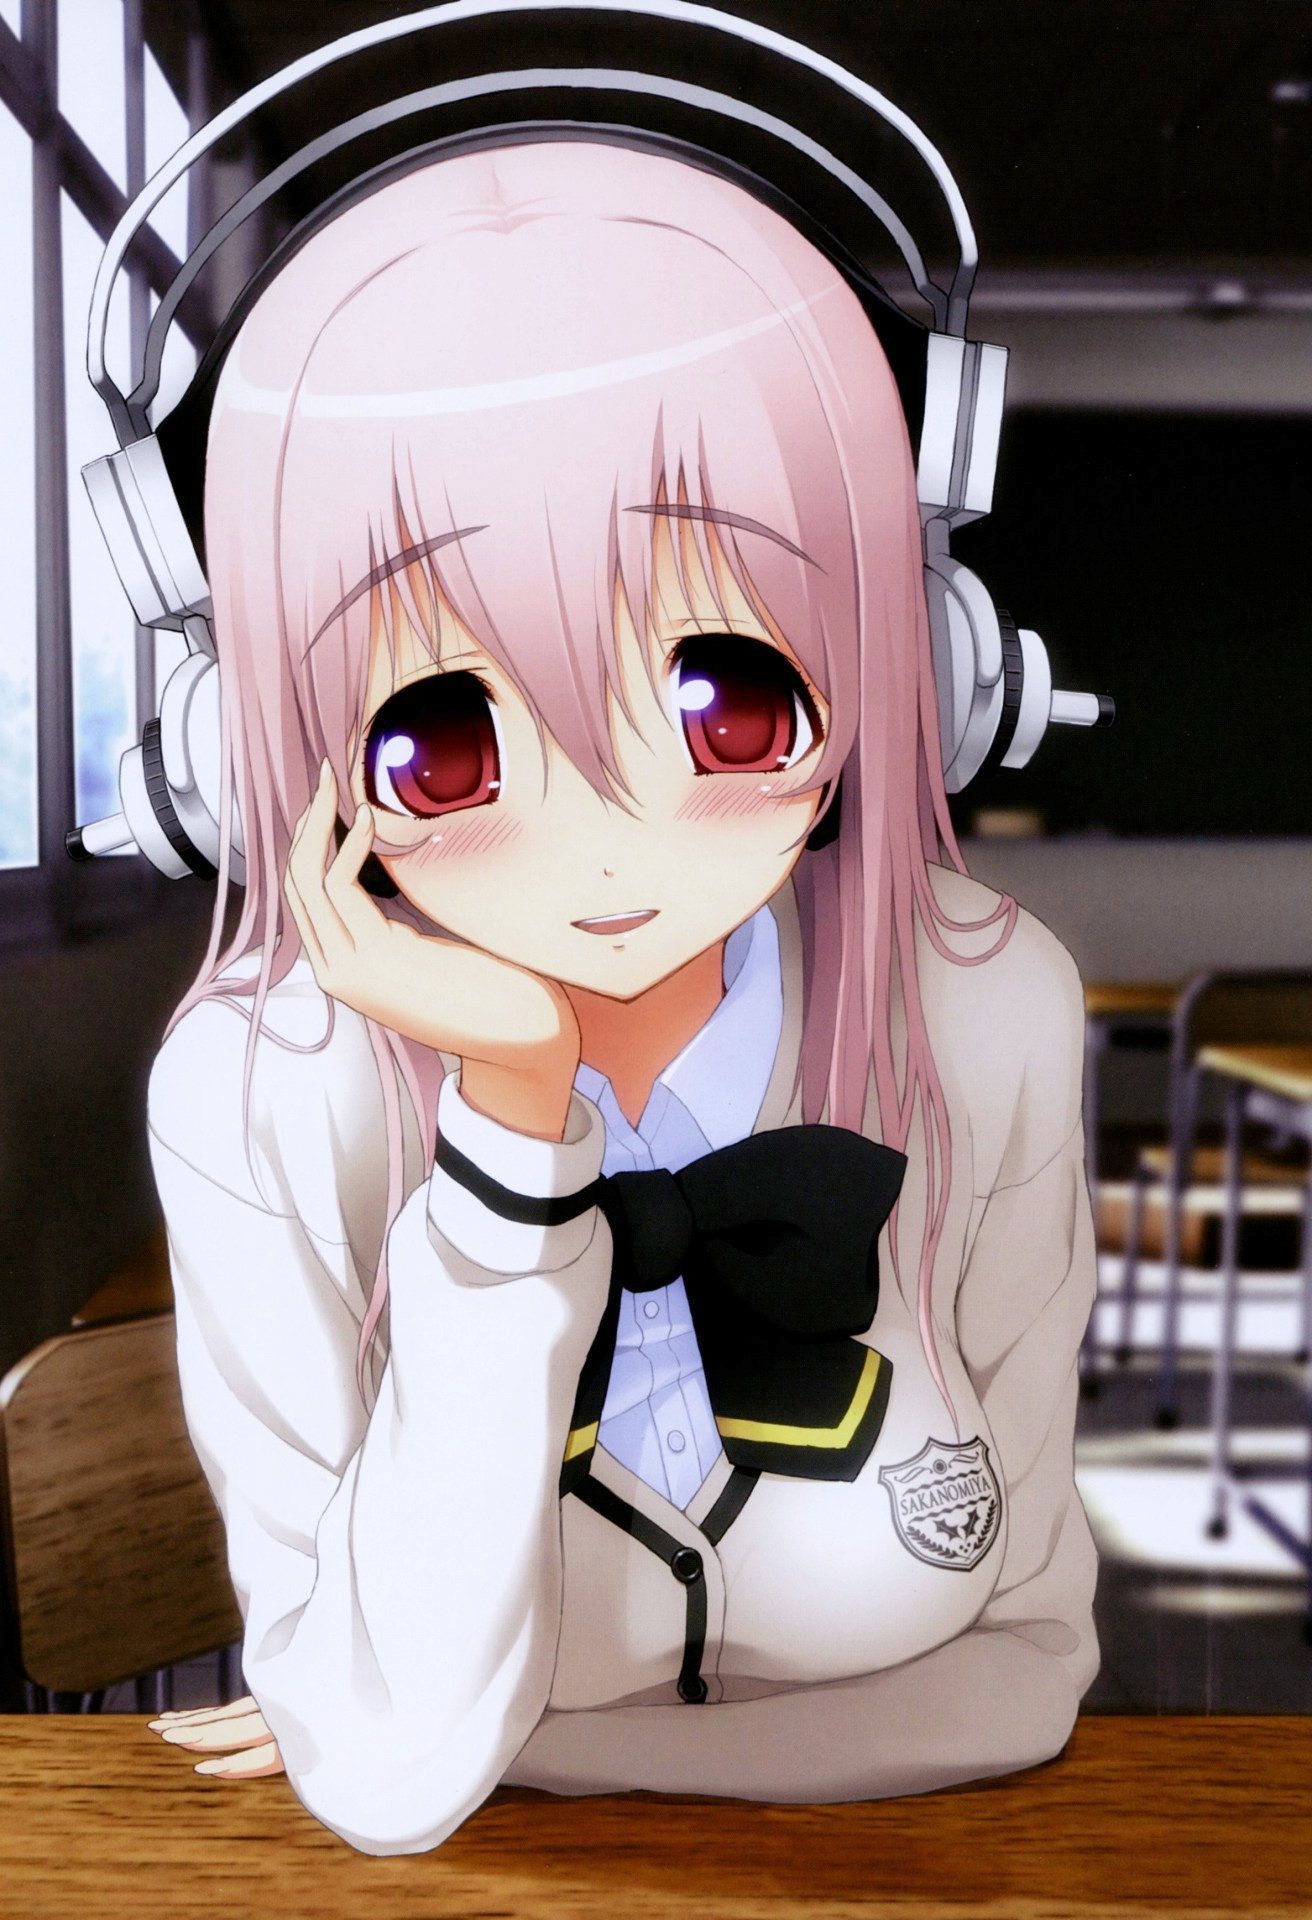 [Secondary] girl I have the headphones (headphones) [images] 32